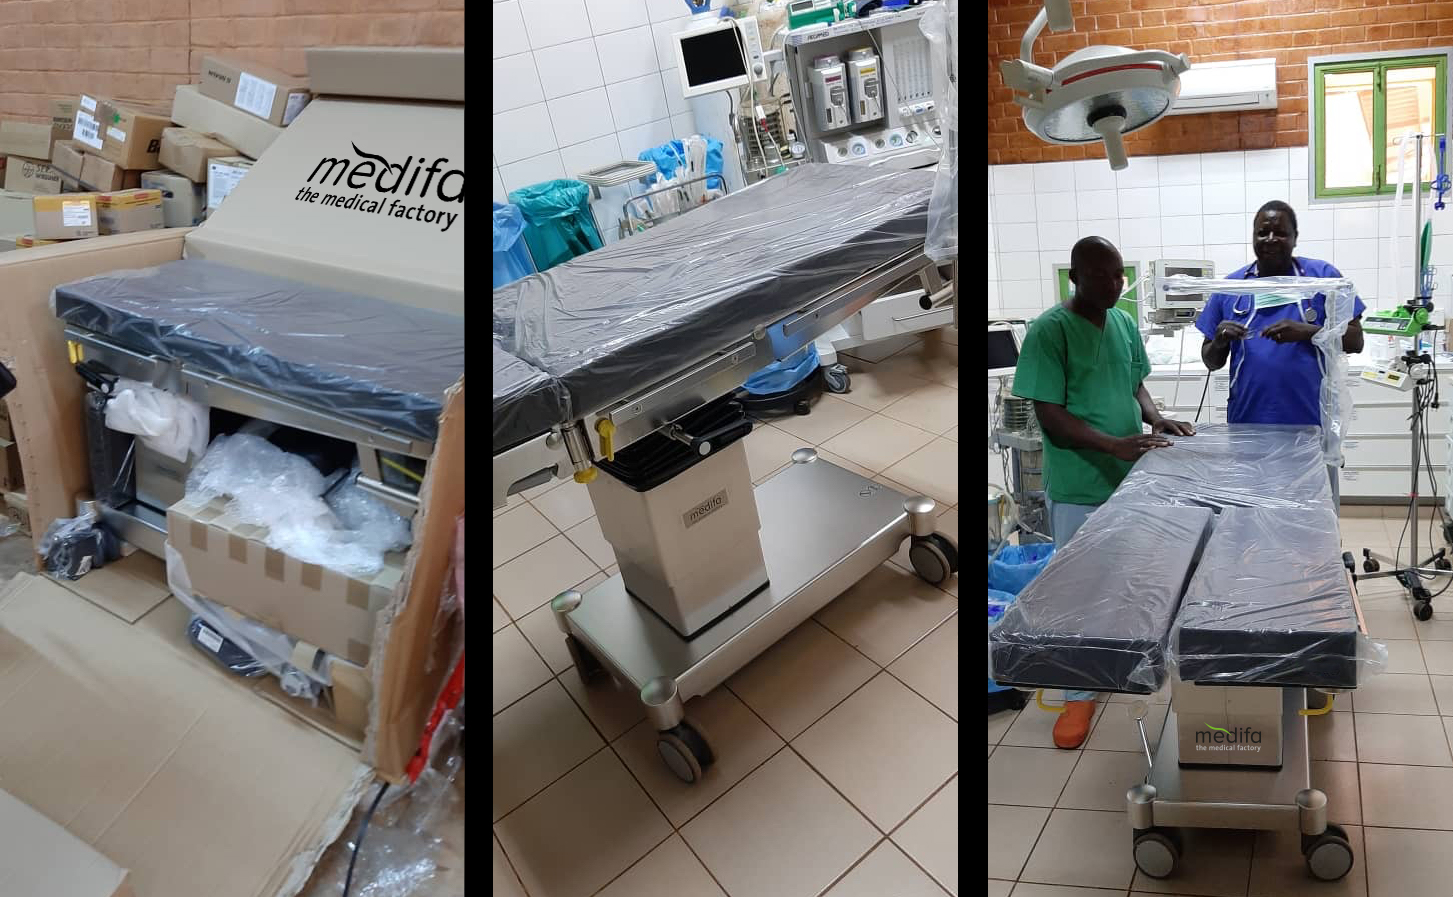 medifa supports healthcare provision in Africa